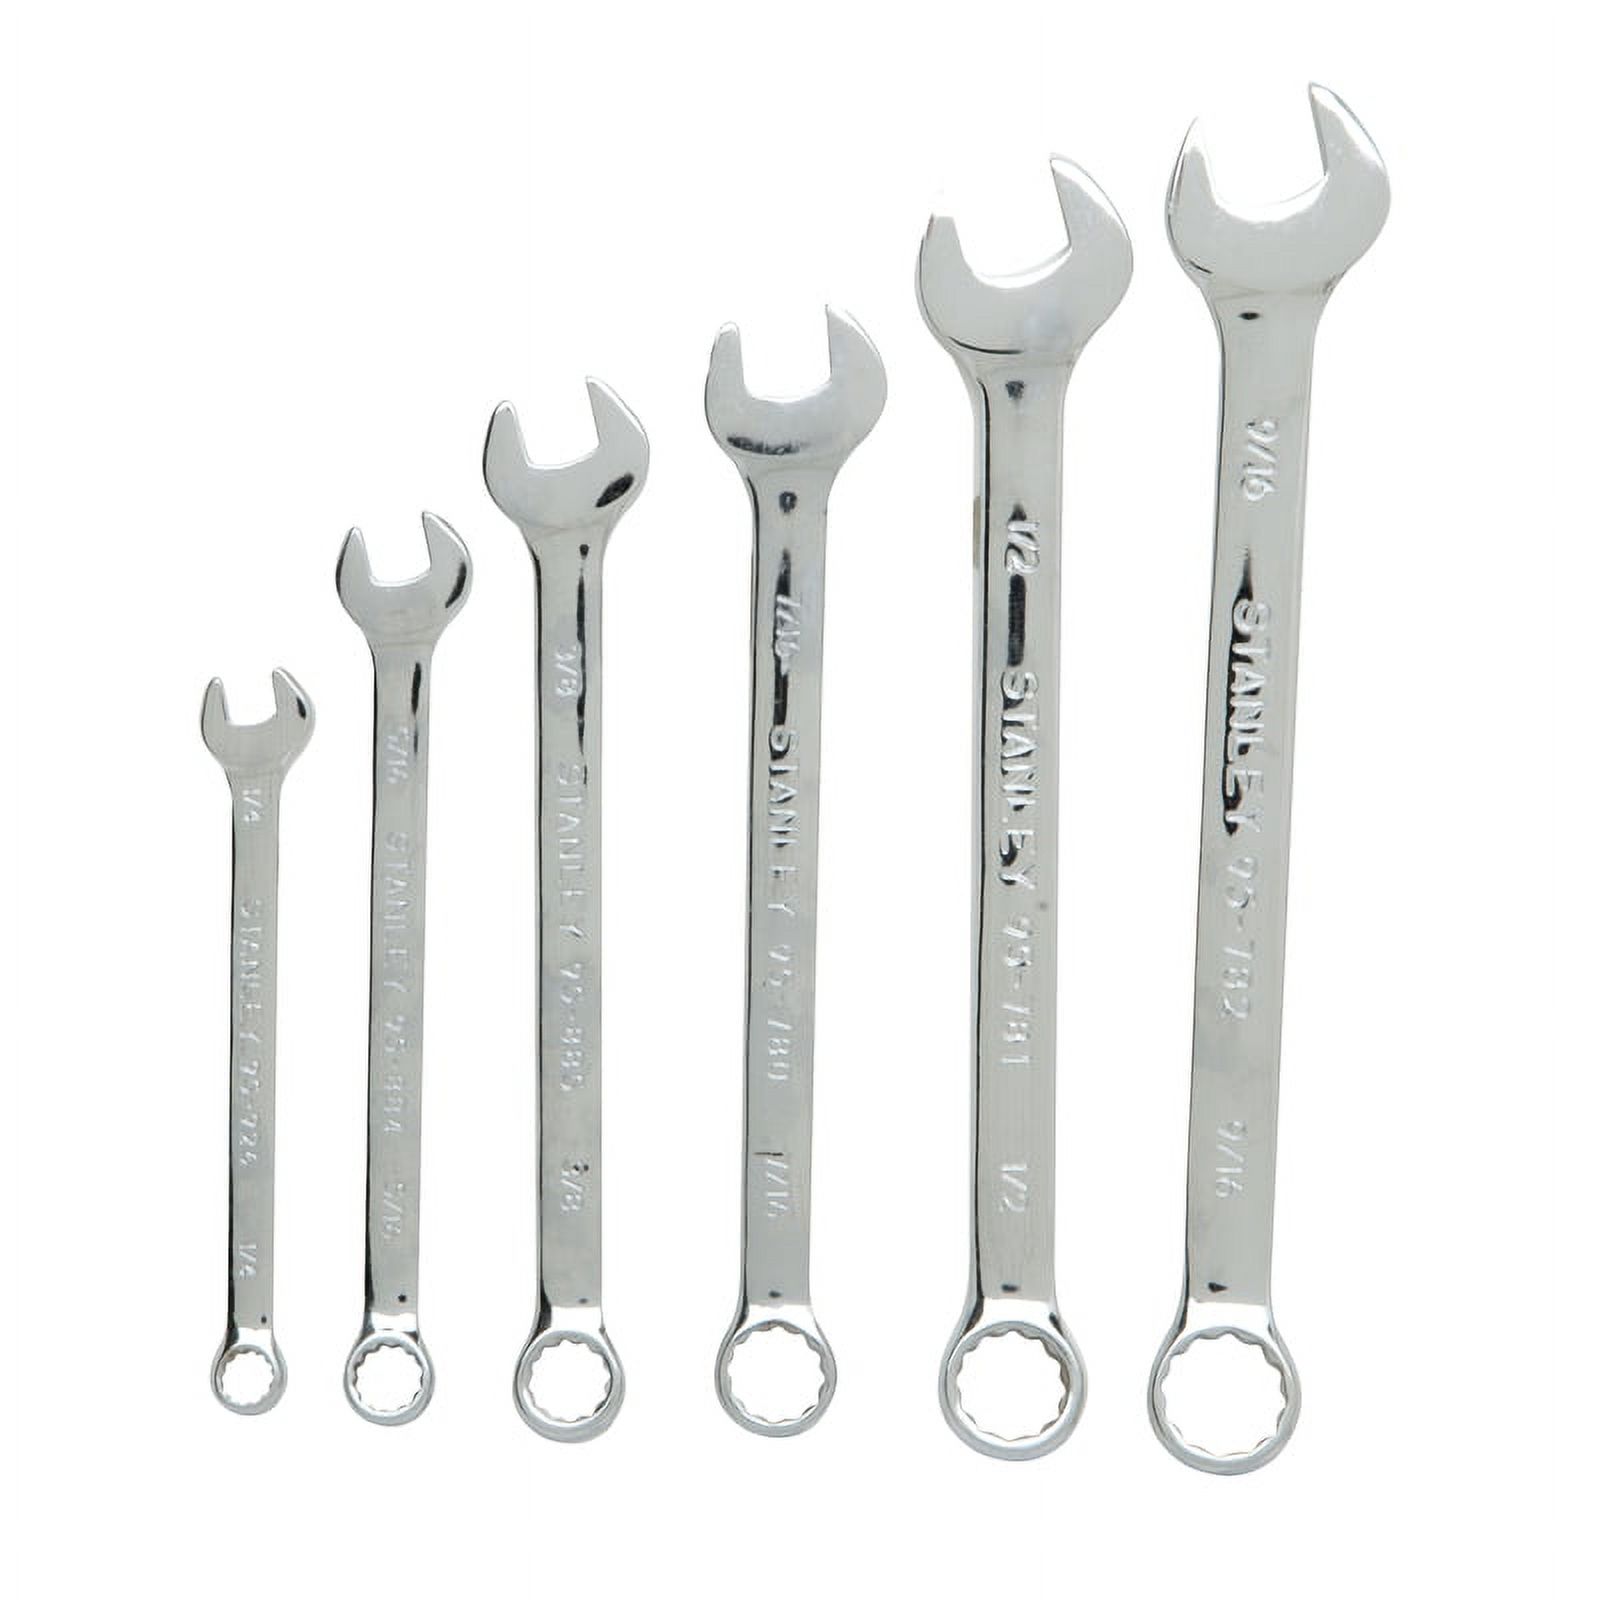 Stanley Combination Wrench Set - 6 PC, 6.0 PIECE(S) - image 1 of 5